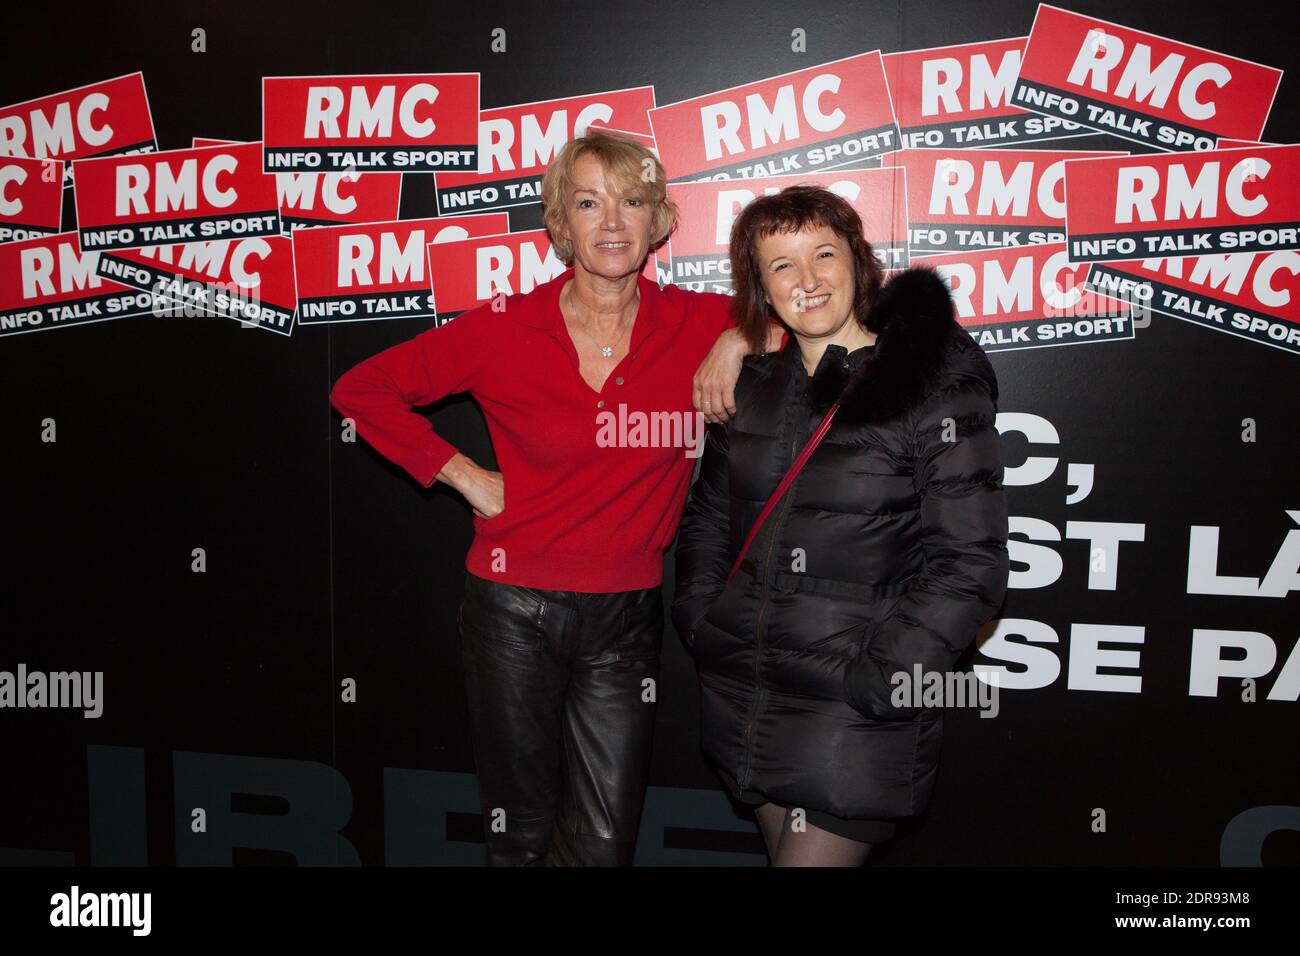 Exclusive - Anne Roumanoff is interviewed by Brigitte Lahaie on RMC radio  in Paris, France on November 02, 2015. Photo by Audrey Poree/  ABACAPRESS.COM Stock Photo - Alamy